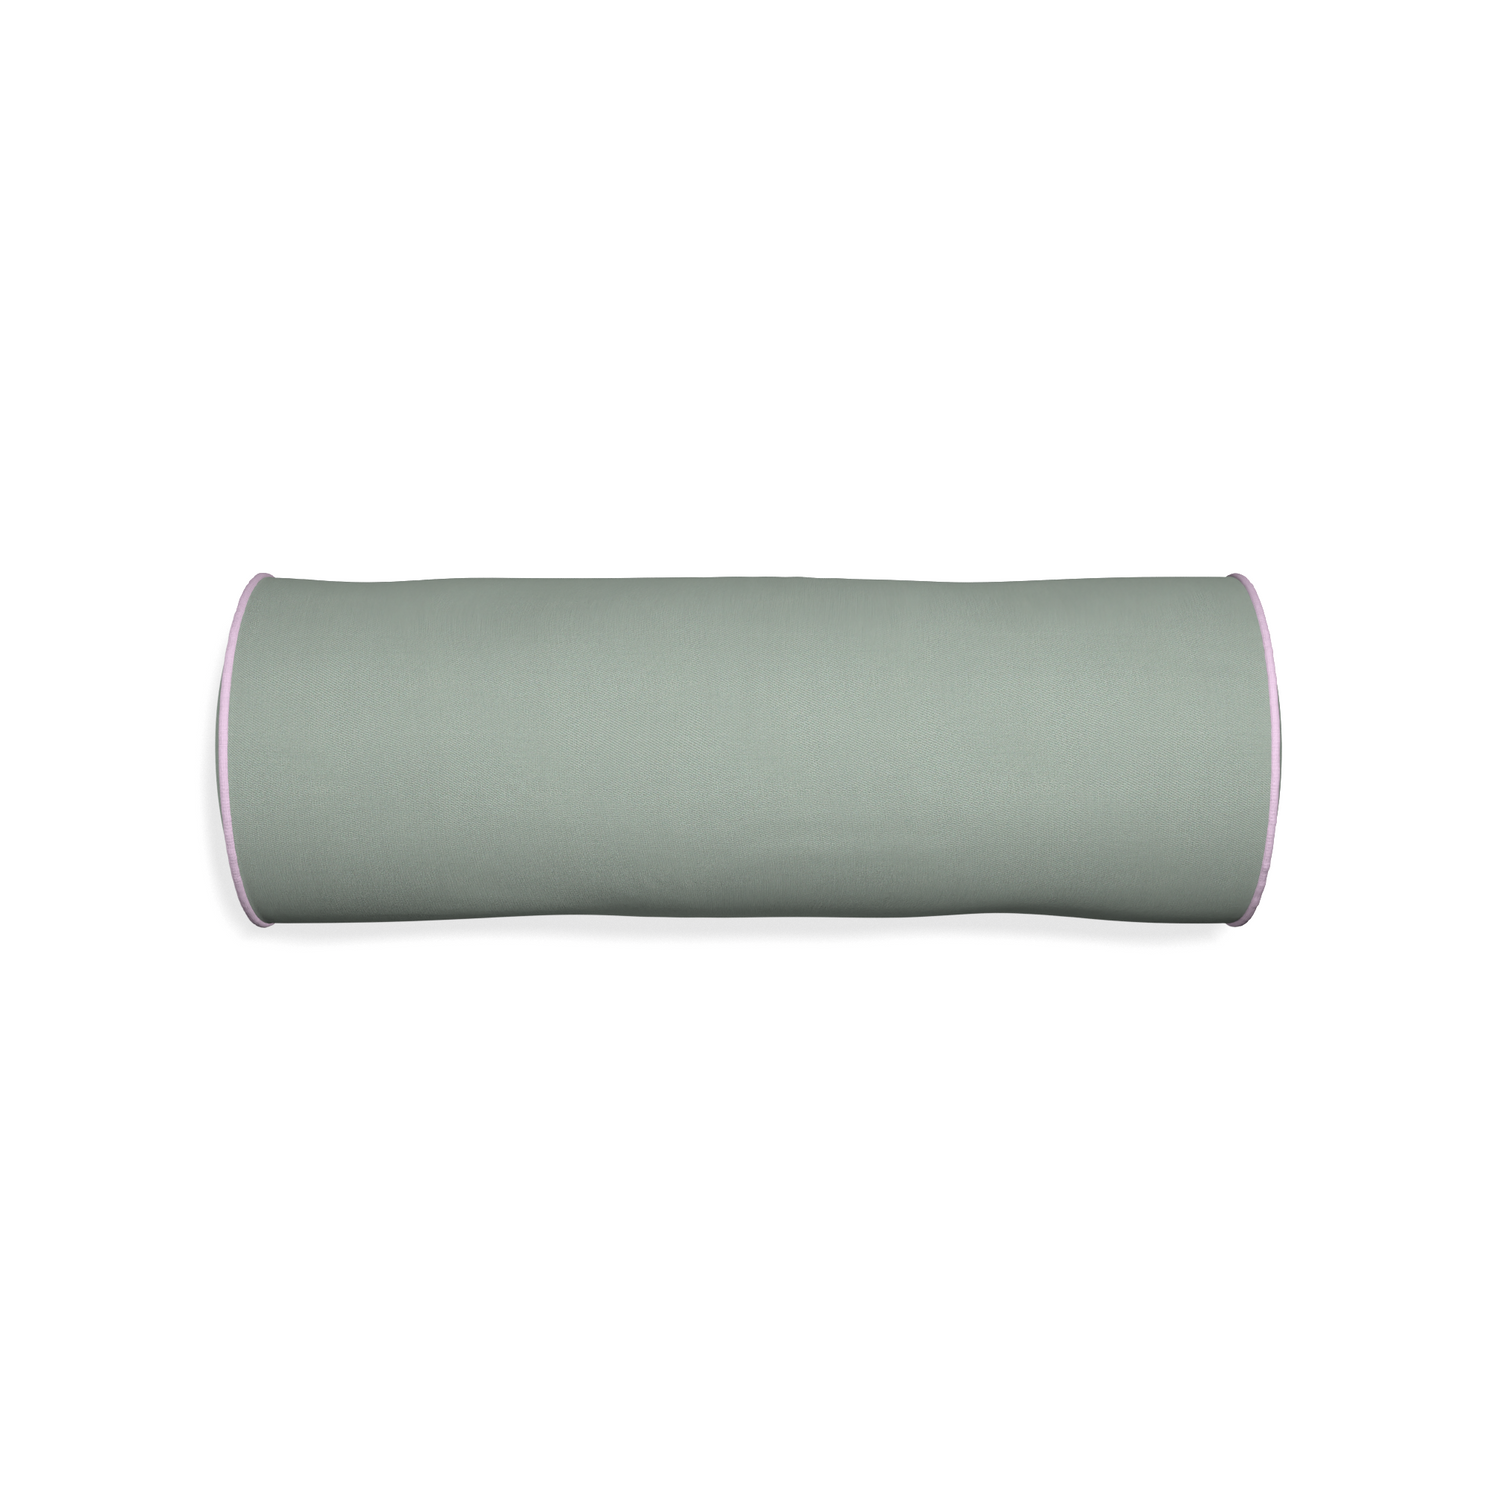 Bolster sage custom sage green cottonpillow with l piping on white background